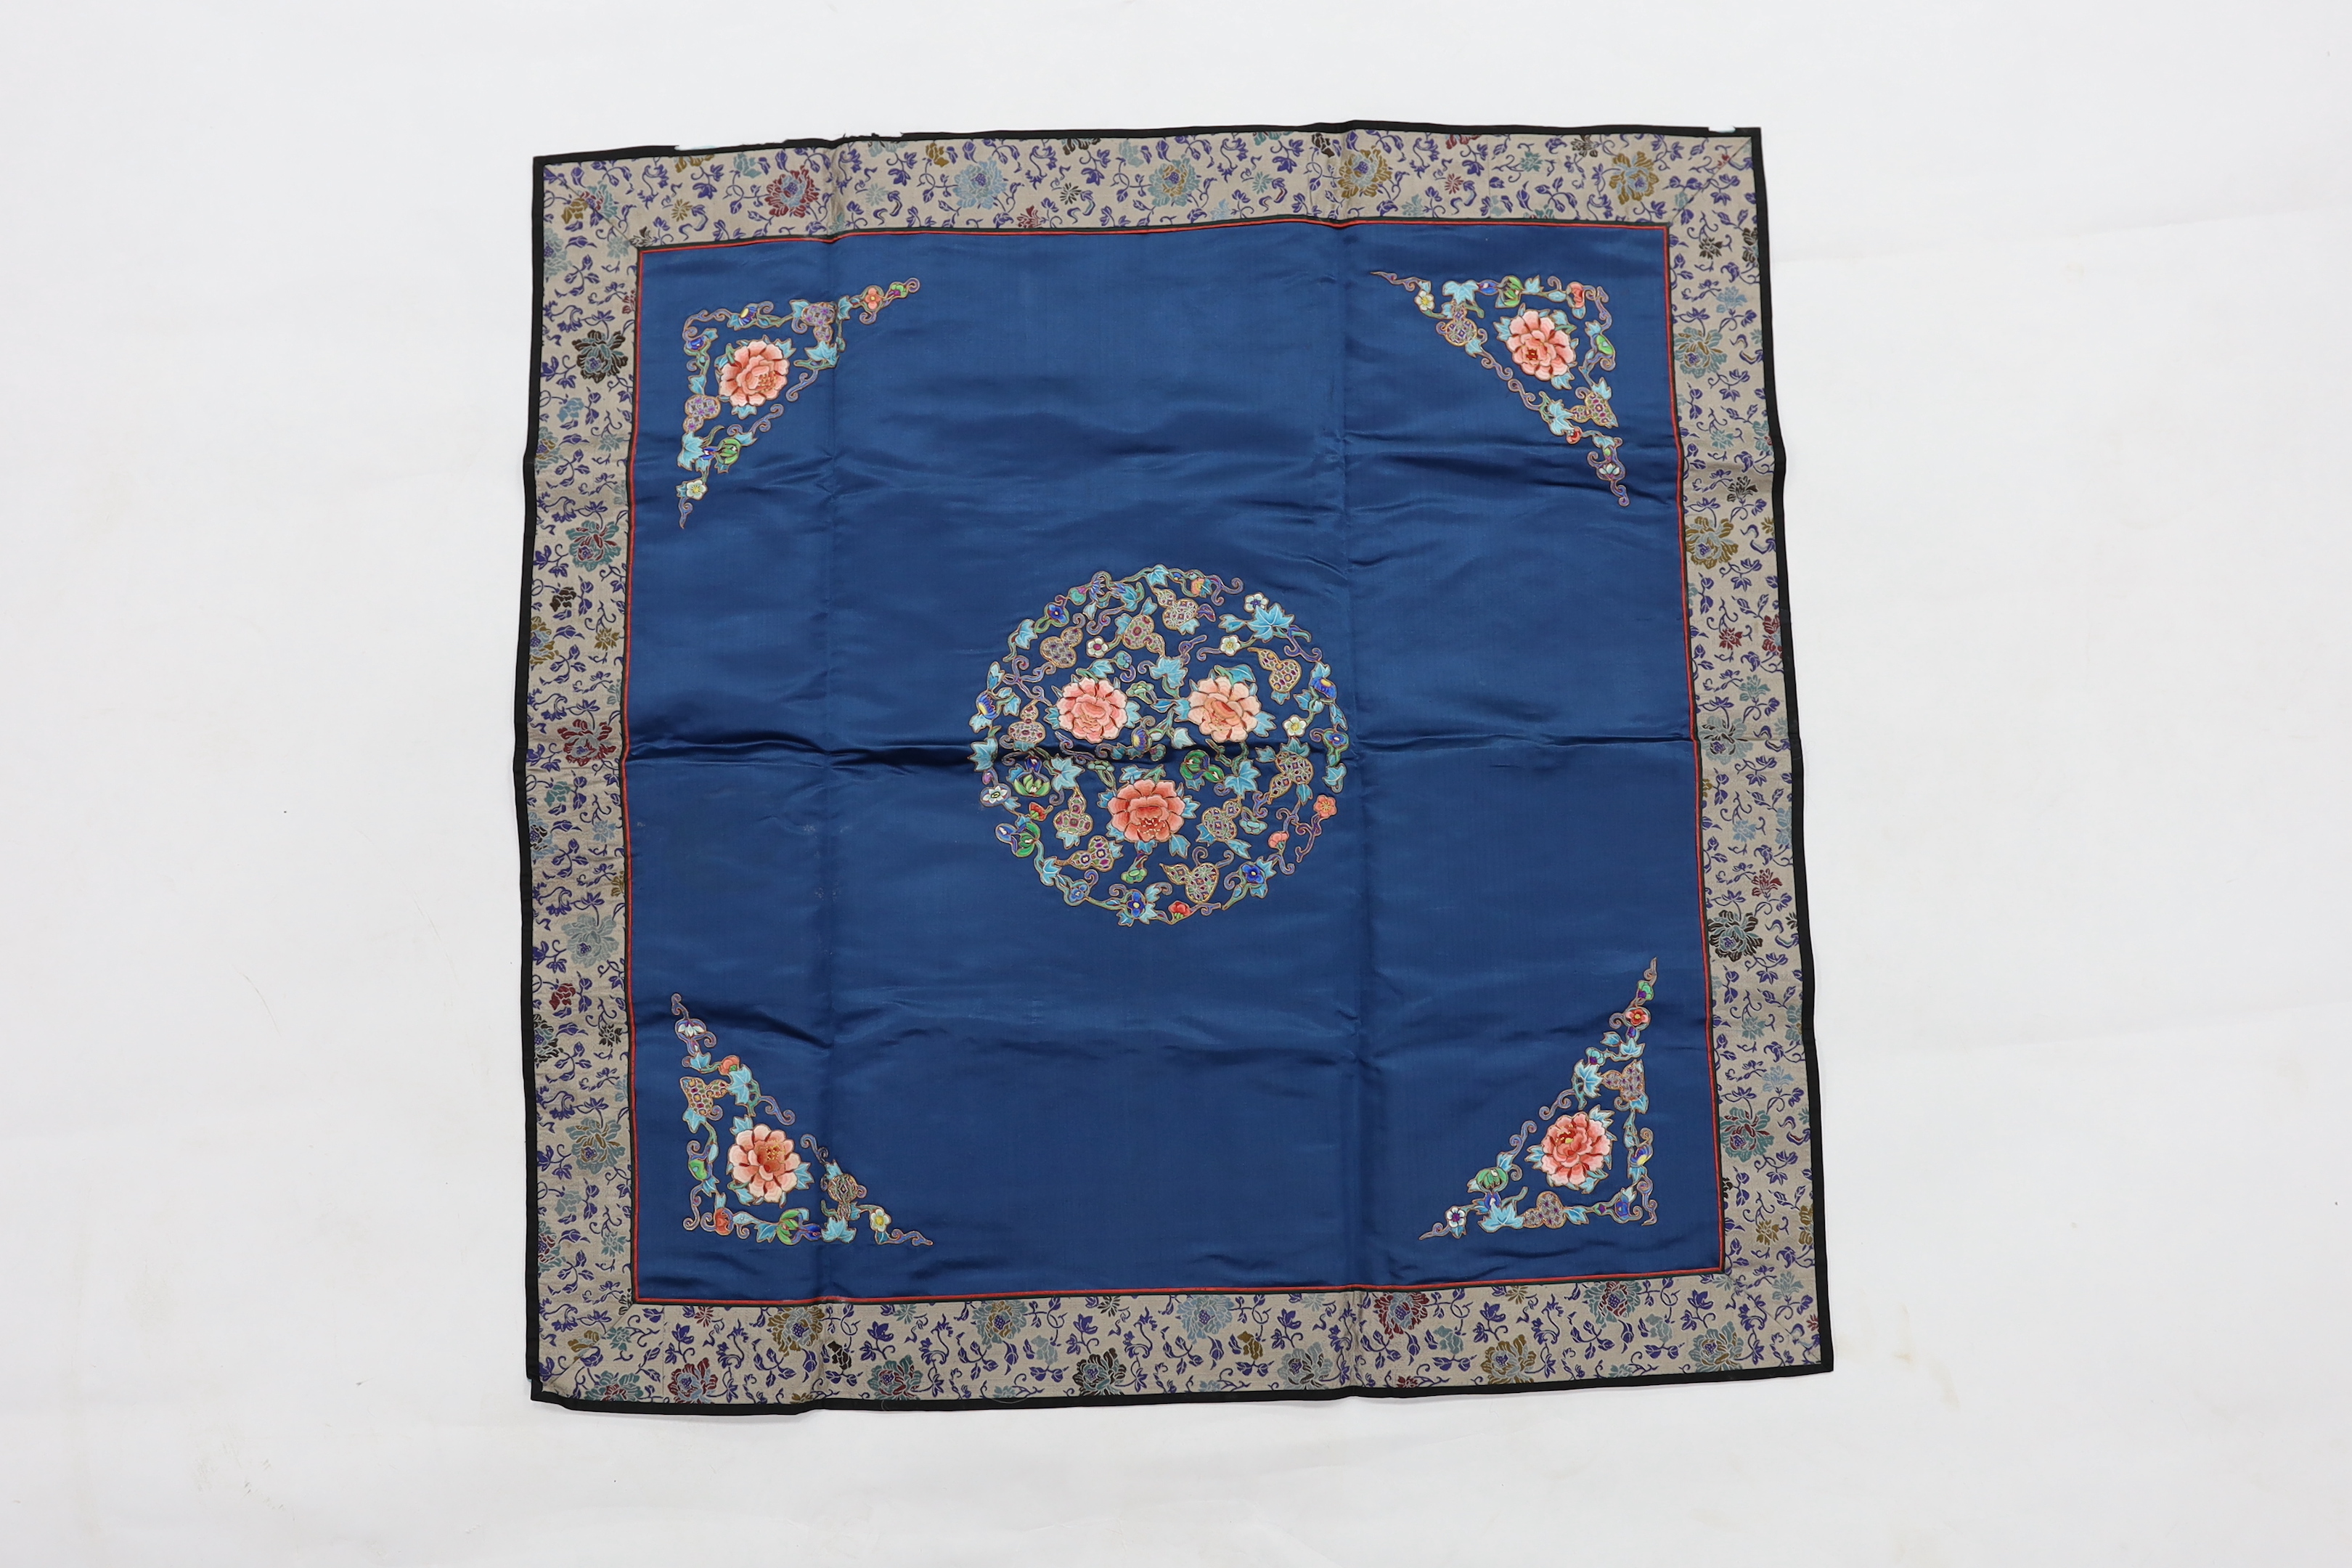 Five Chinese embroidered mats with polychrome silk embroidery using Beijing knot stitch, together with a large square blue silk cover with silk embroidered spot motifs and gold thread work, all items bordered with silk b